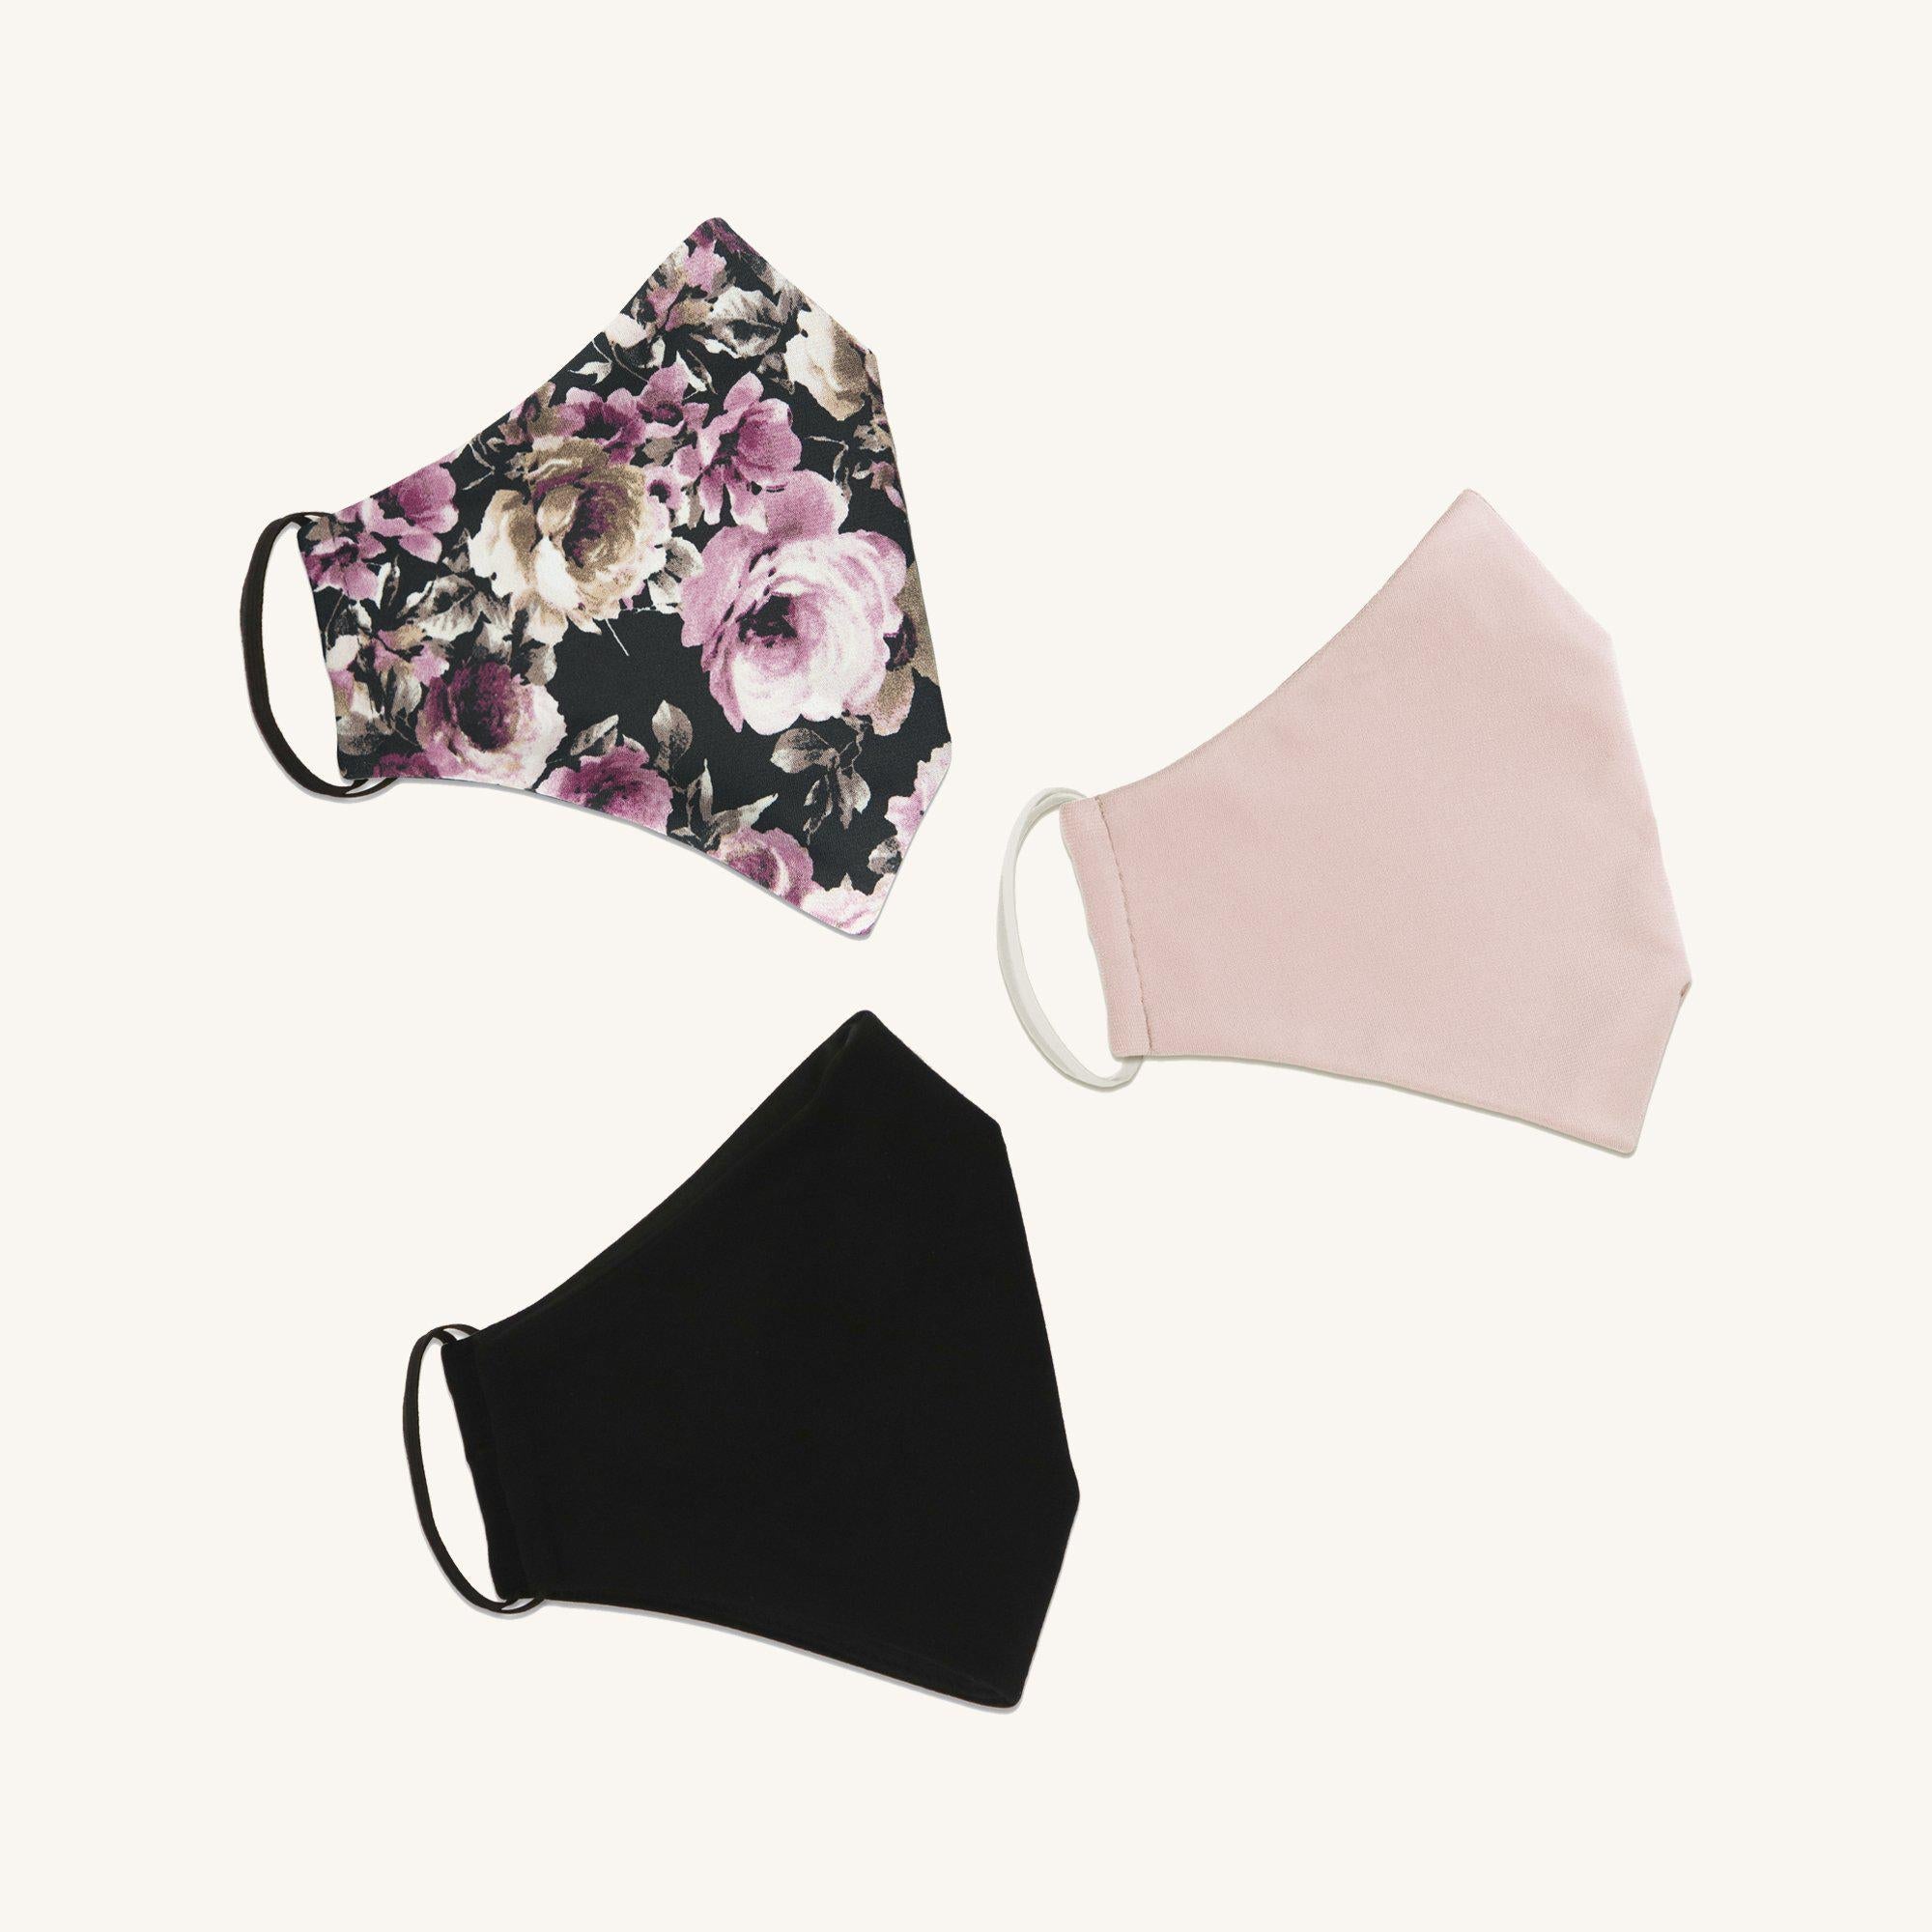 Woman posing wearing Multicolor Spring Pink Floral Face Mask Multipack (Set of 3) from Connected Apparel